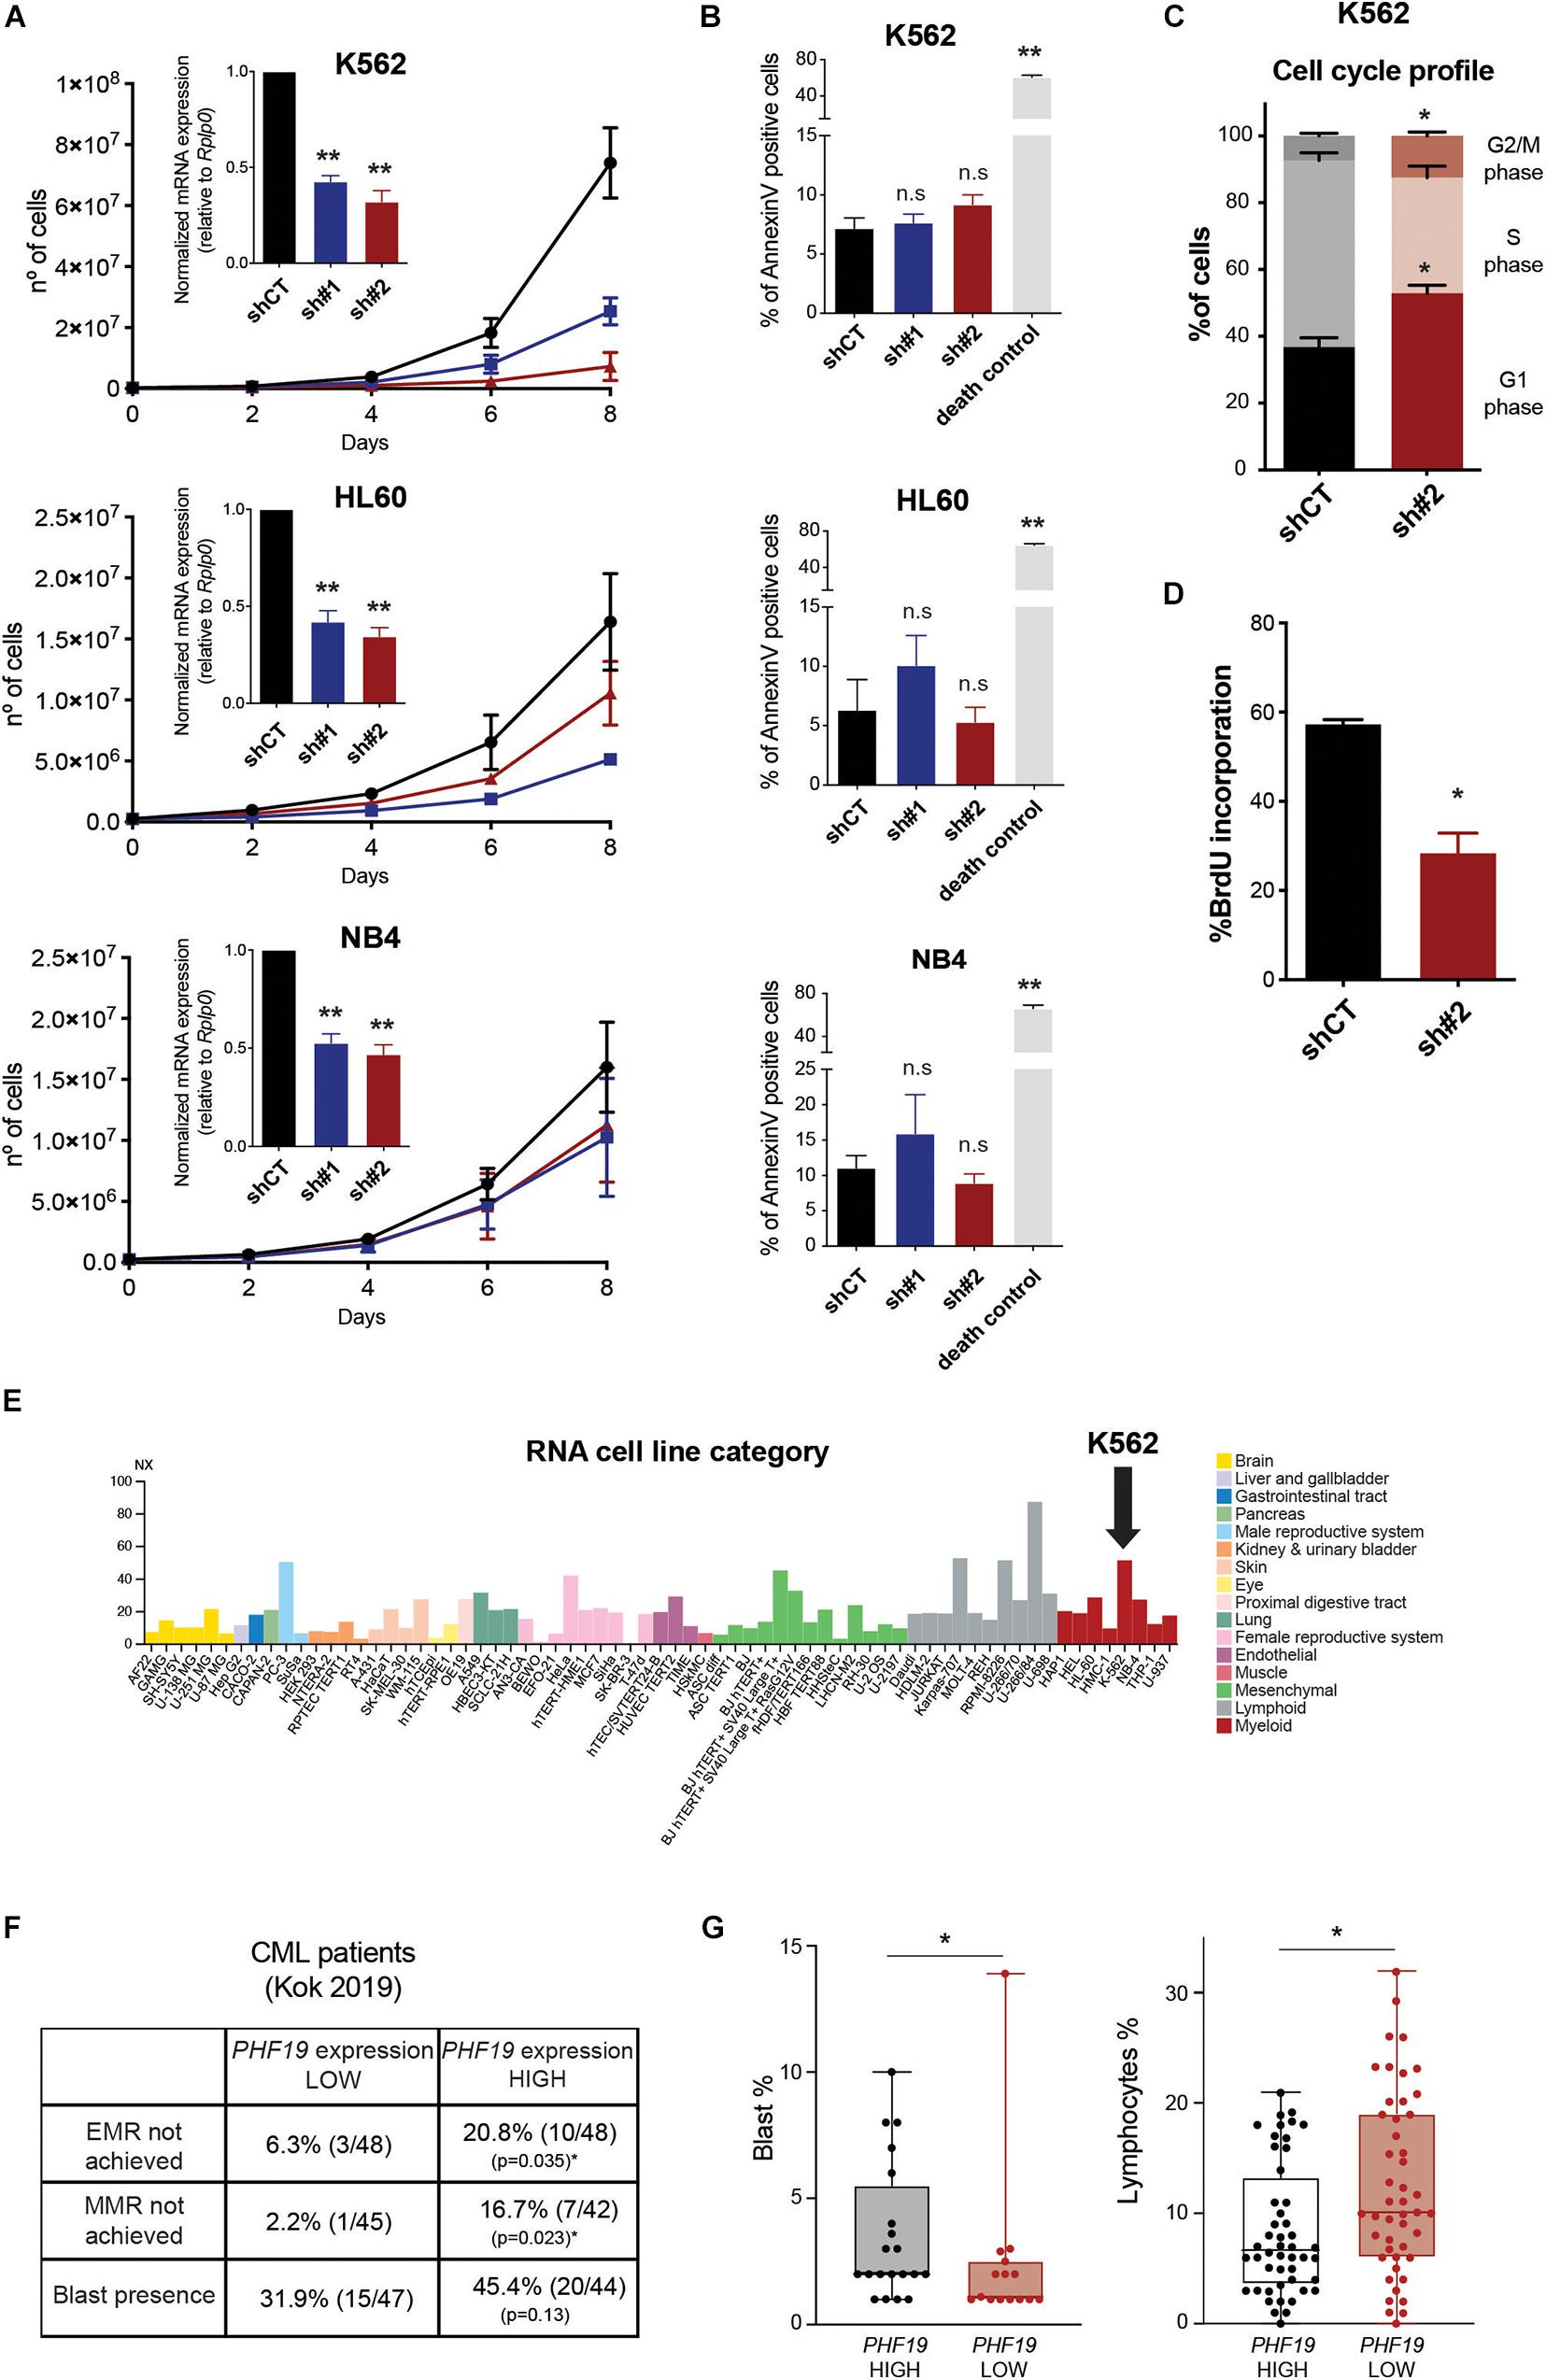 Frontiers Polycomb Factor Phf19 Controls Cell Growth And Differentiation Toward Erythroid Pathway In Chronic Myeloid Leukemia Cells Cell And Developmental Biology